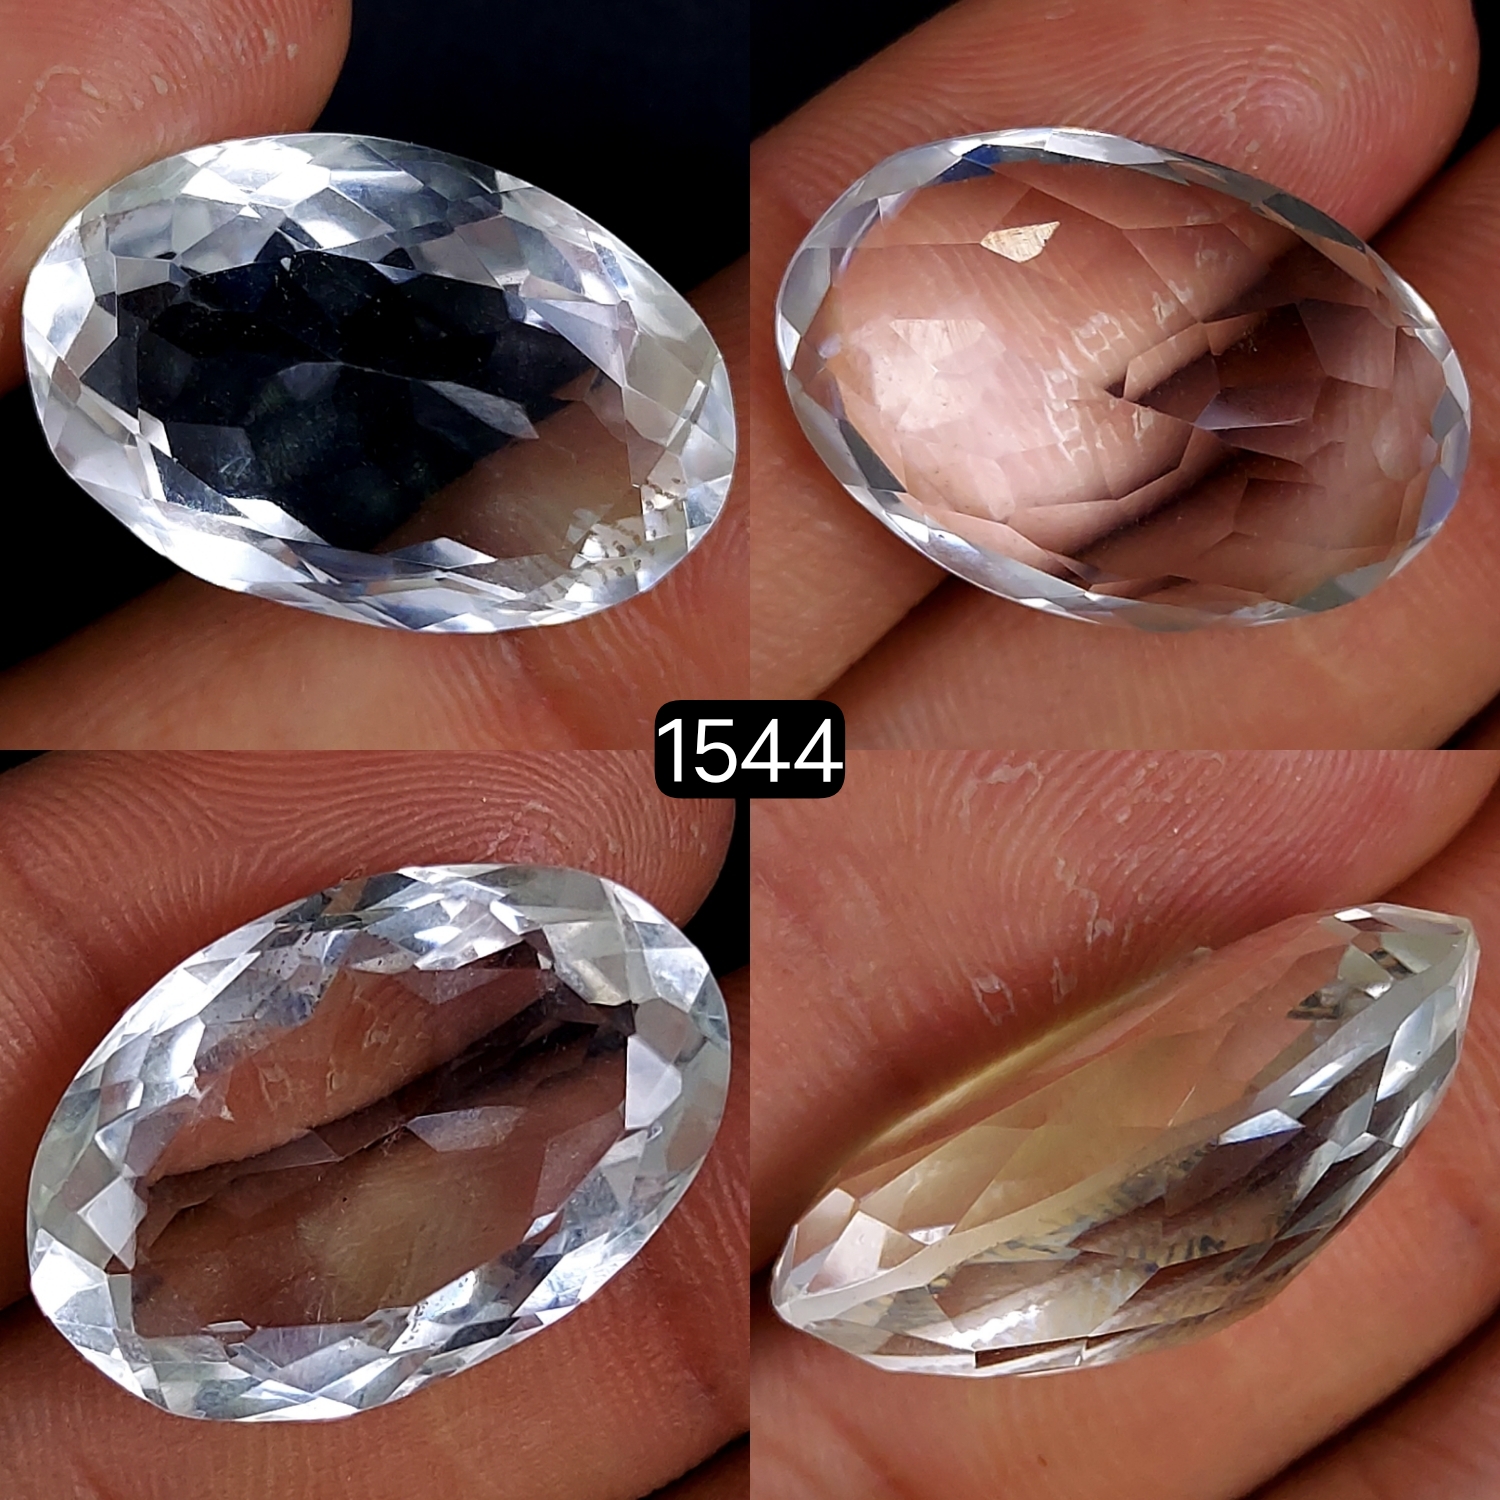 1Pc 27Cts Natural Crystal Quartz Faceted Cabochon Gemstone Oval Shape Crystal 25x17mm#1544